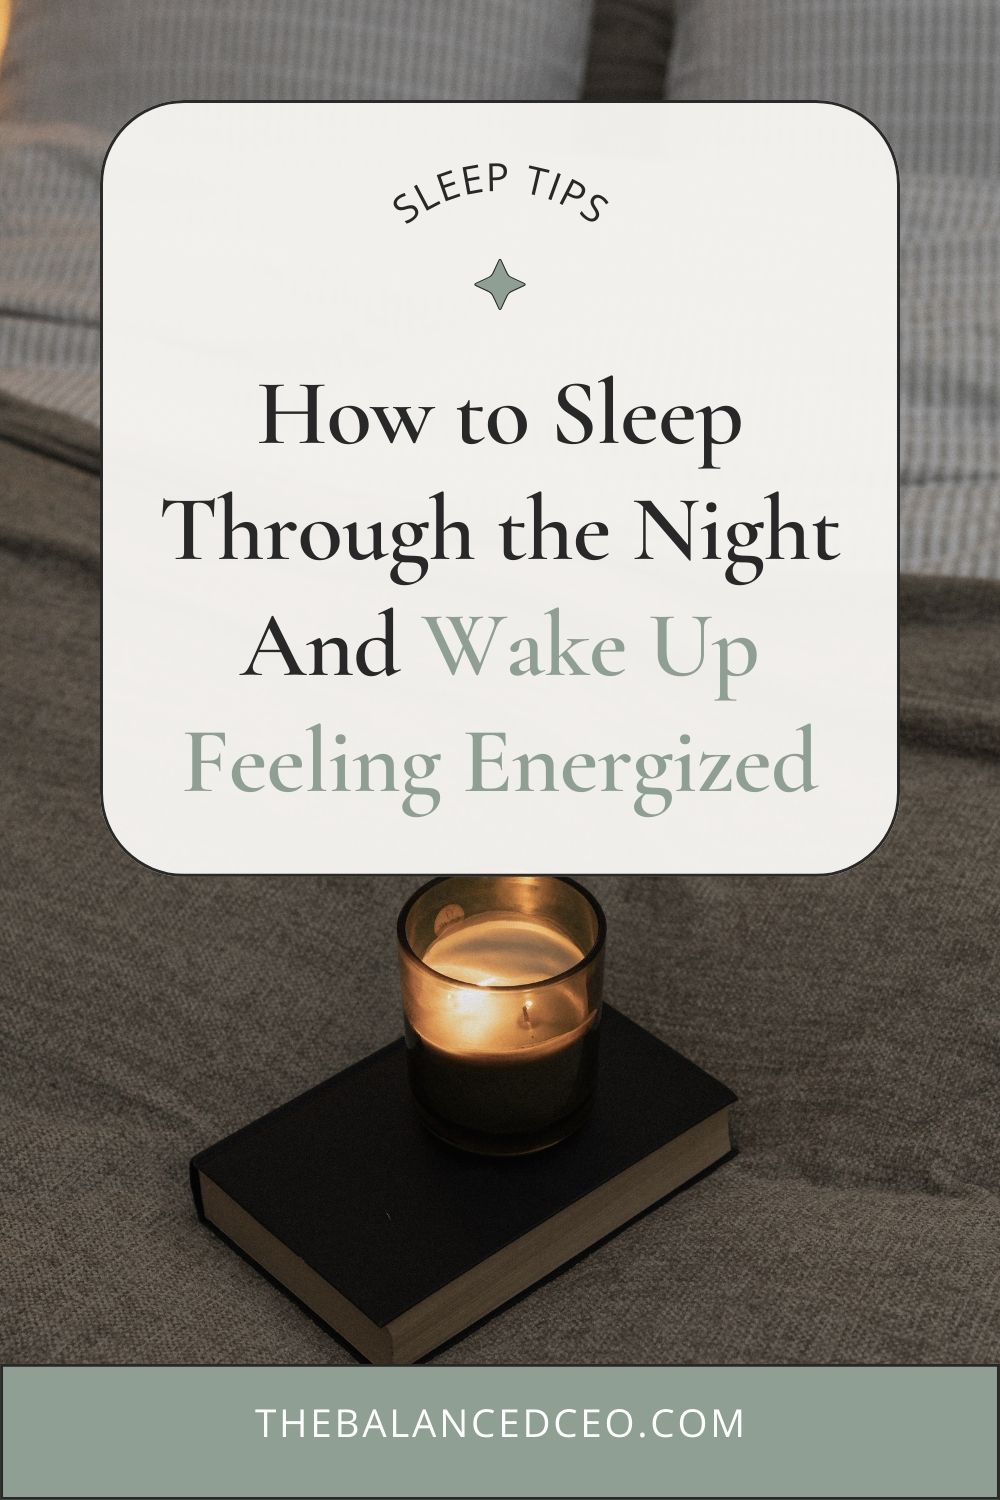 How to Sleep Through the Night and Wake Up Energized